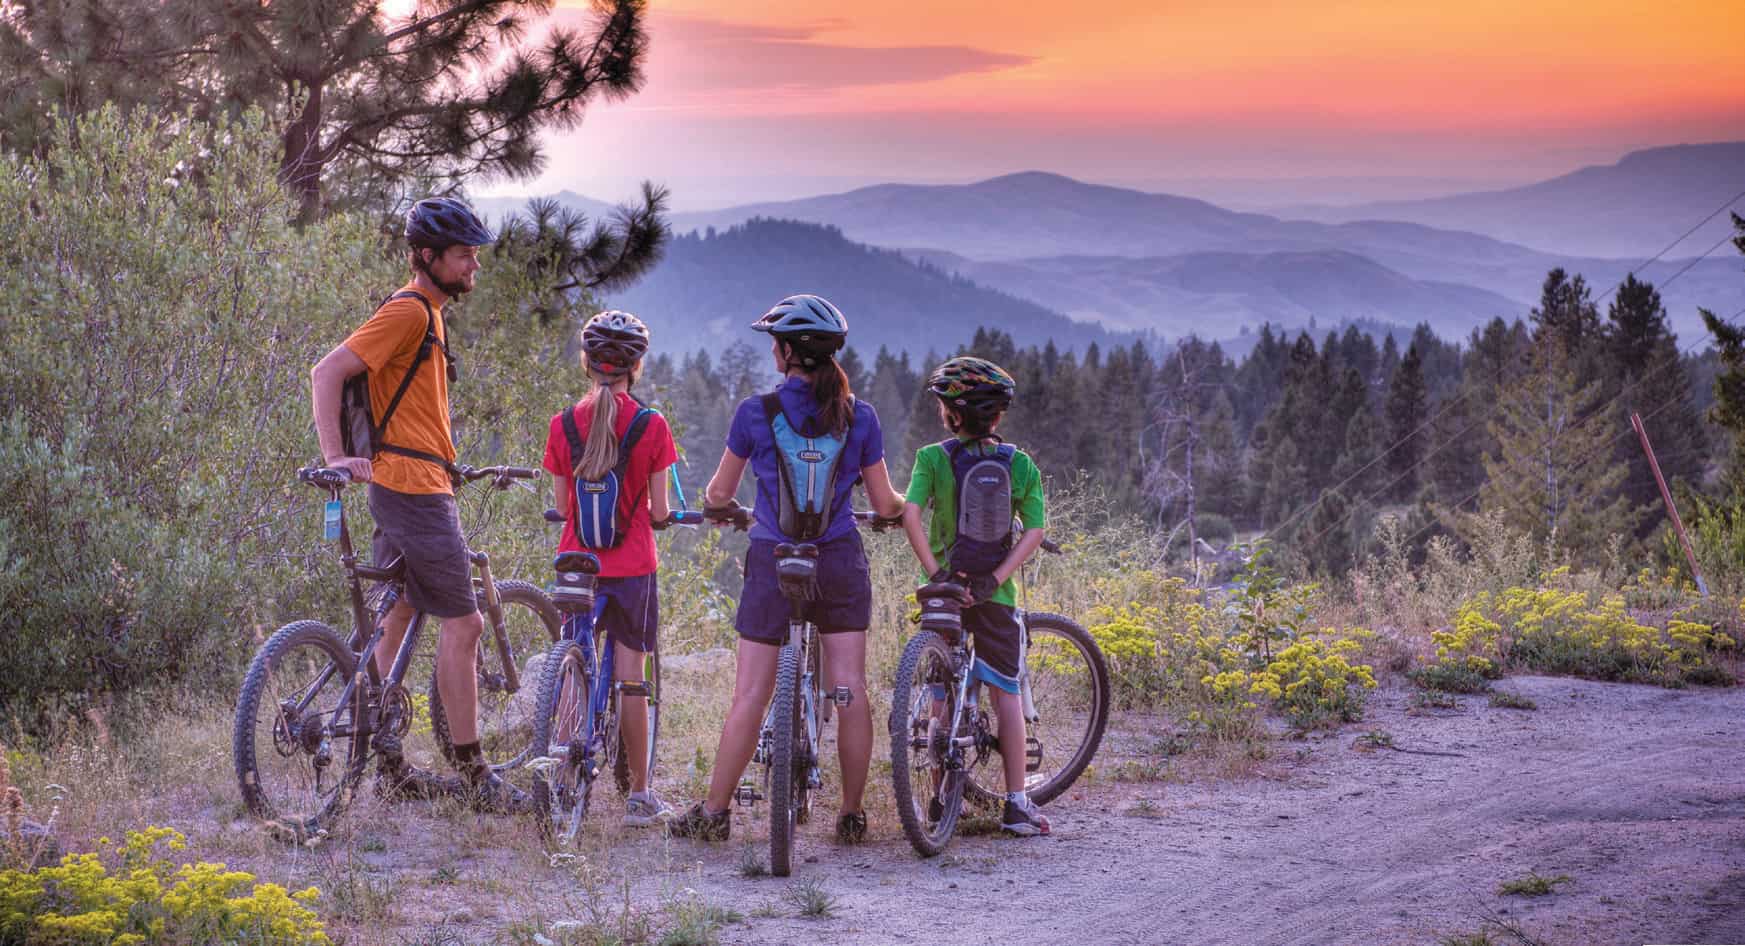 Bogus Basin Mountain Recreation Area offers mountain biking for many levels.